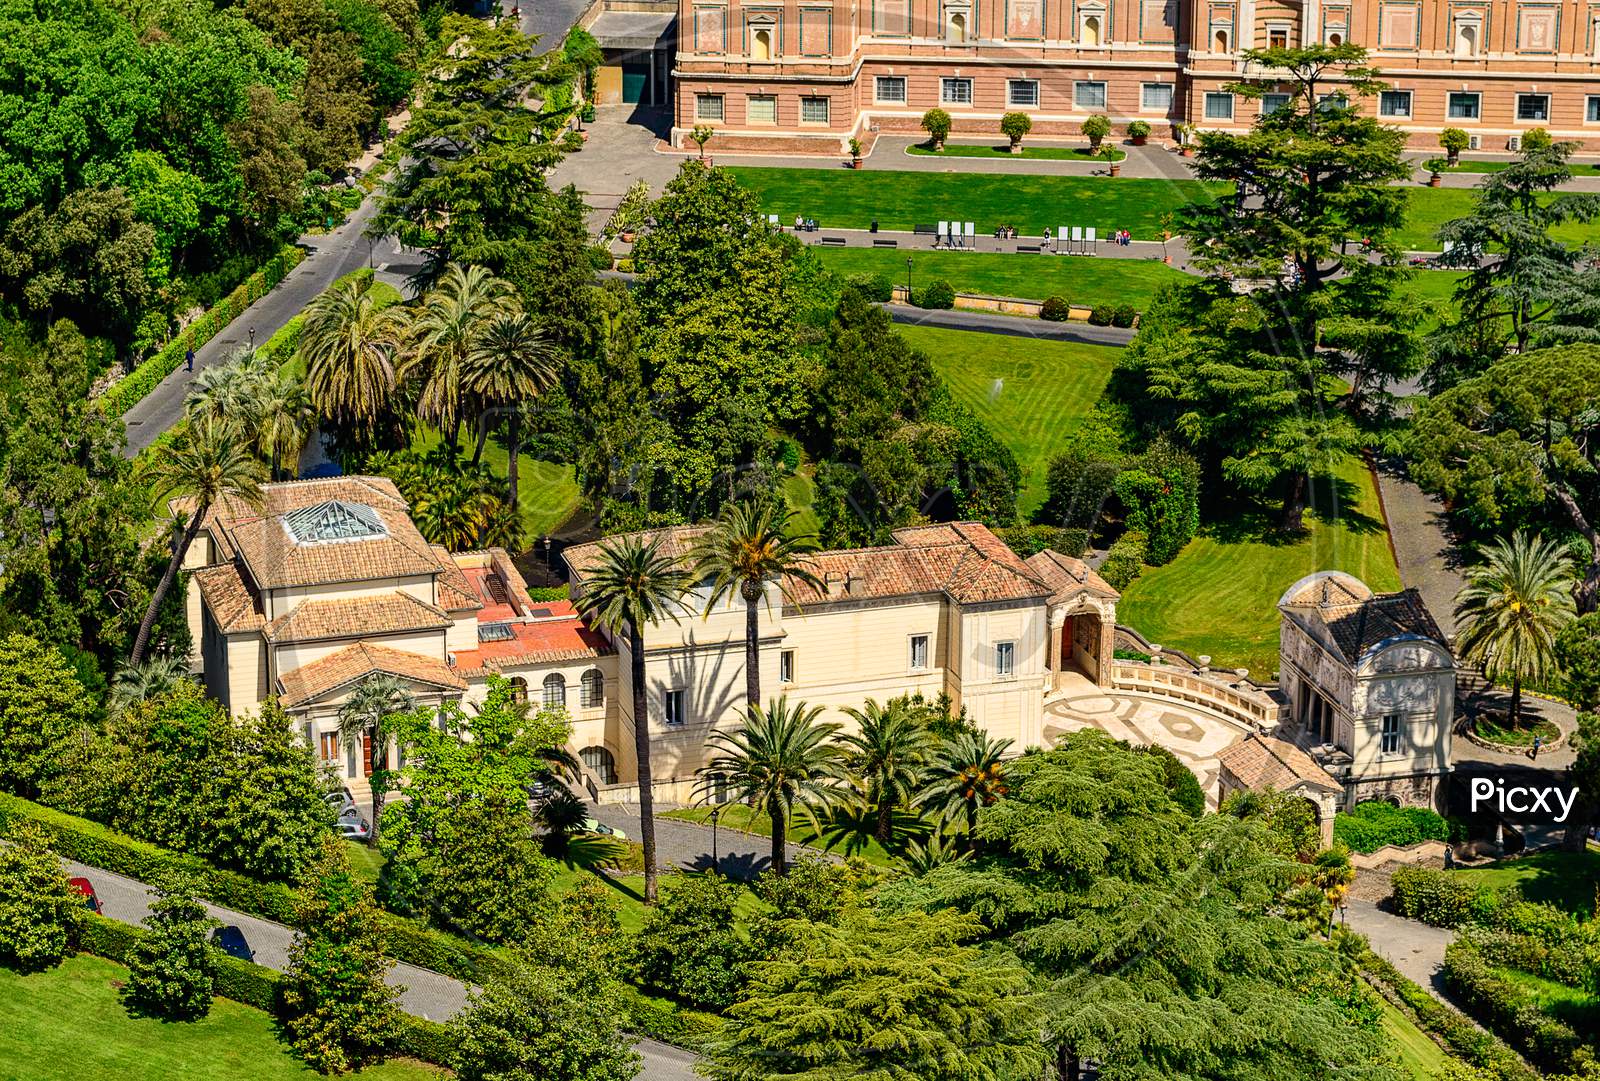 Luxurious Villa And Gardens In Rome, Italy